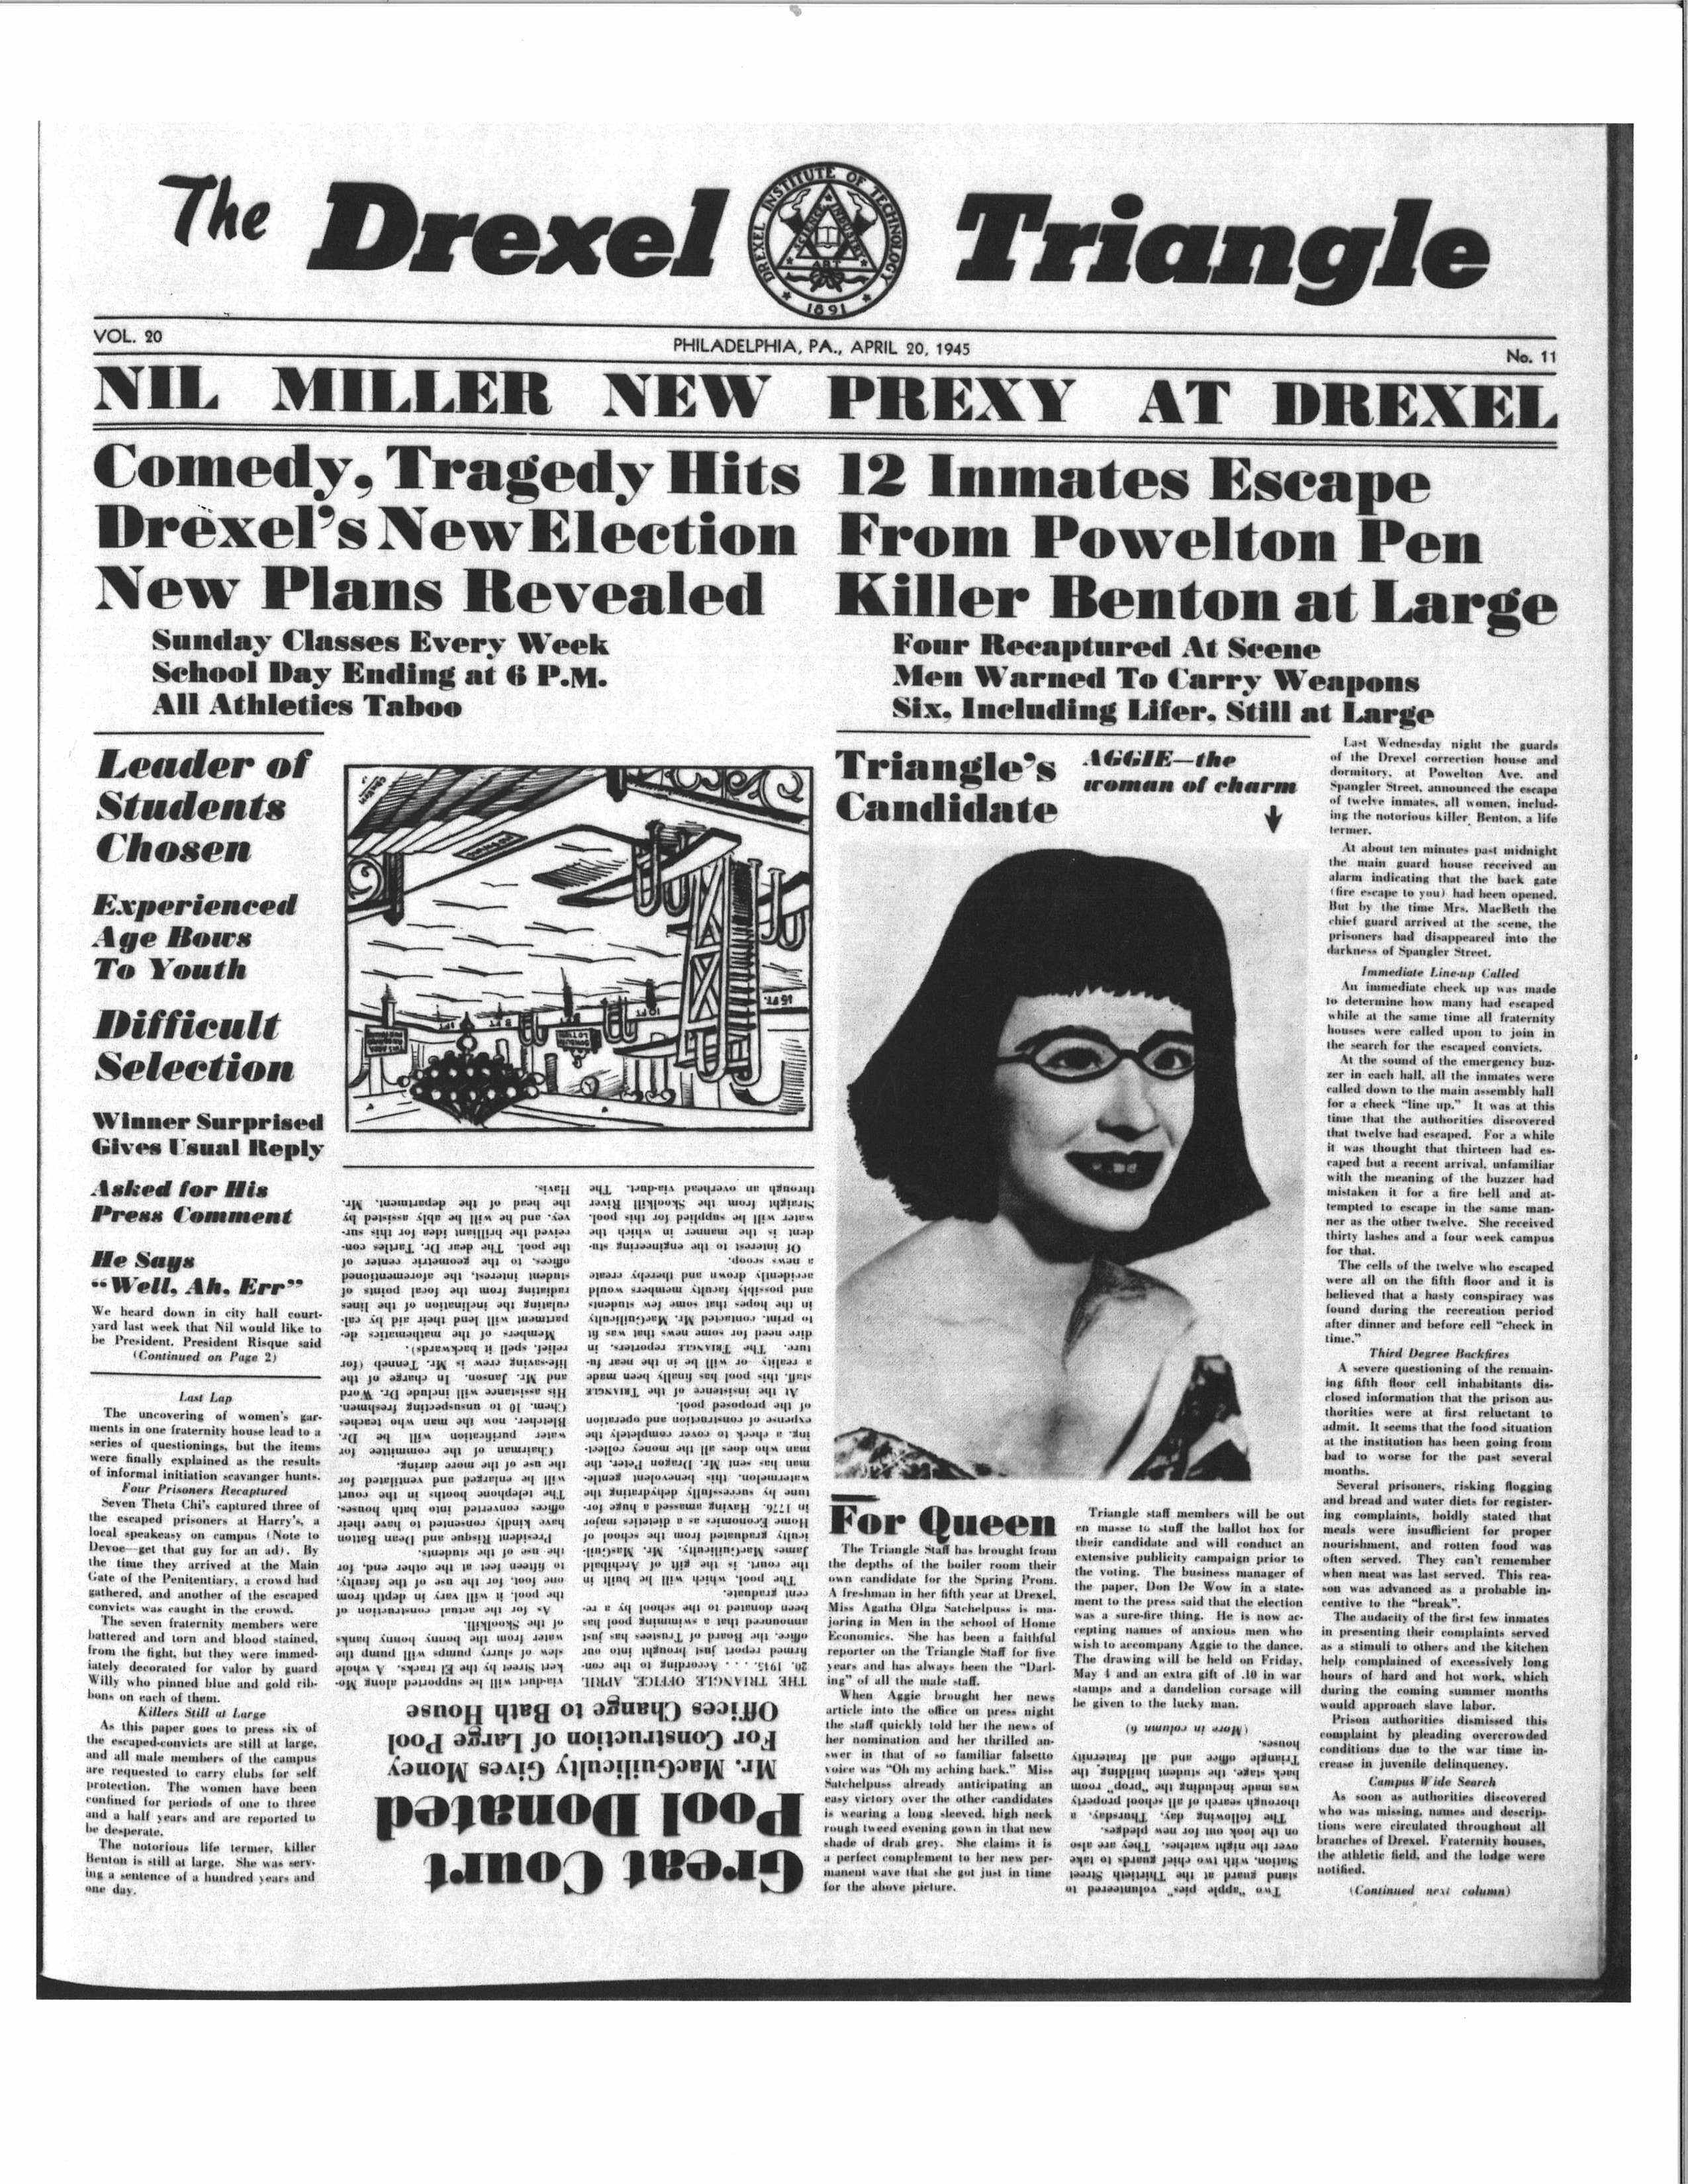 The front page of The Triangle's 1945 joke issue.